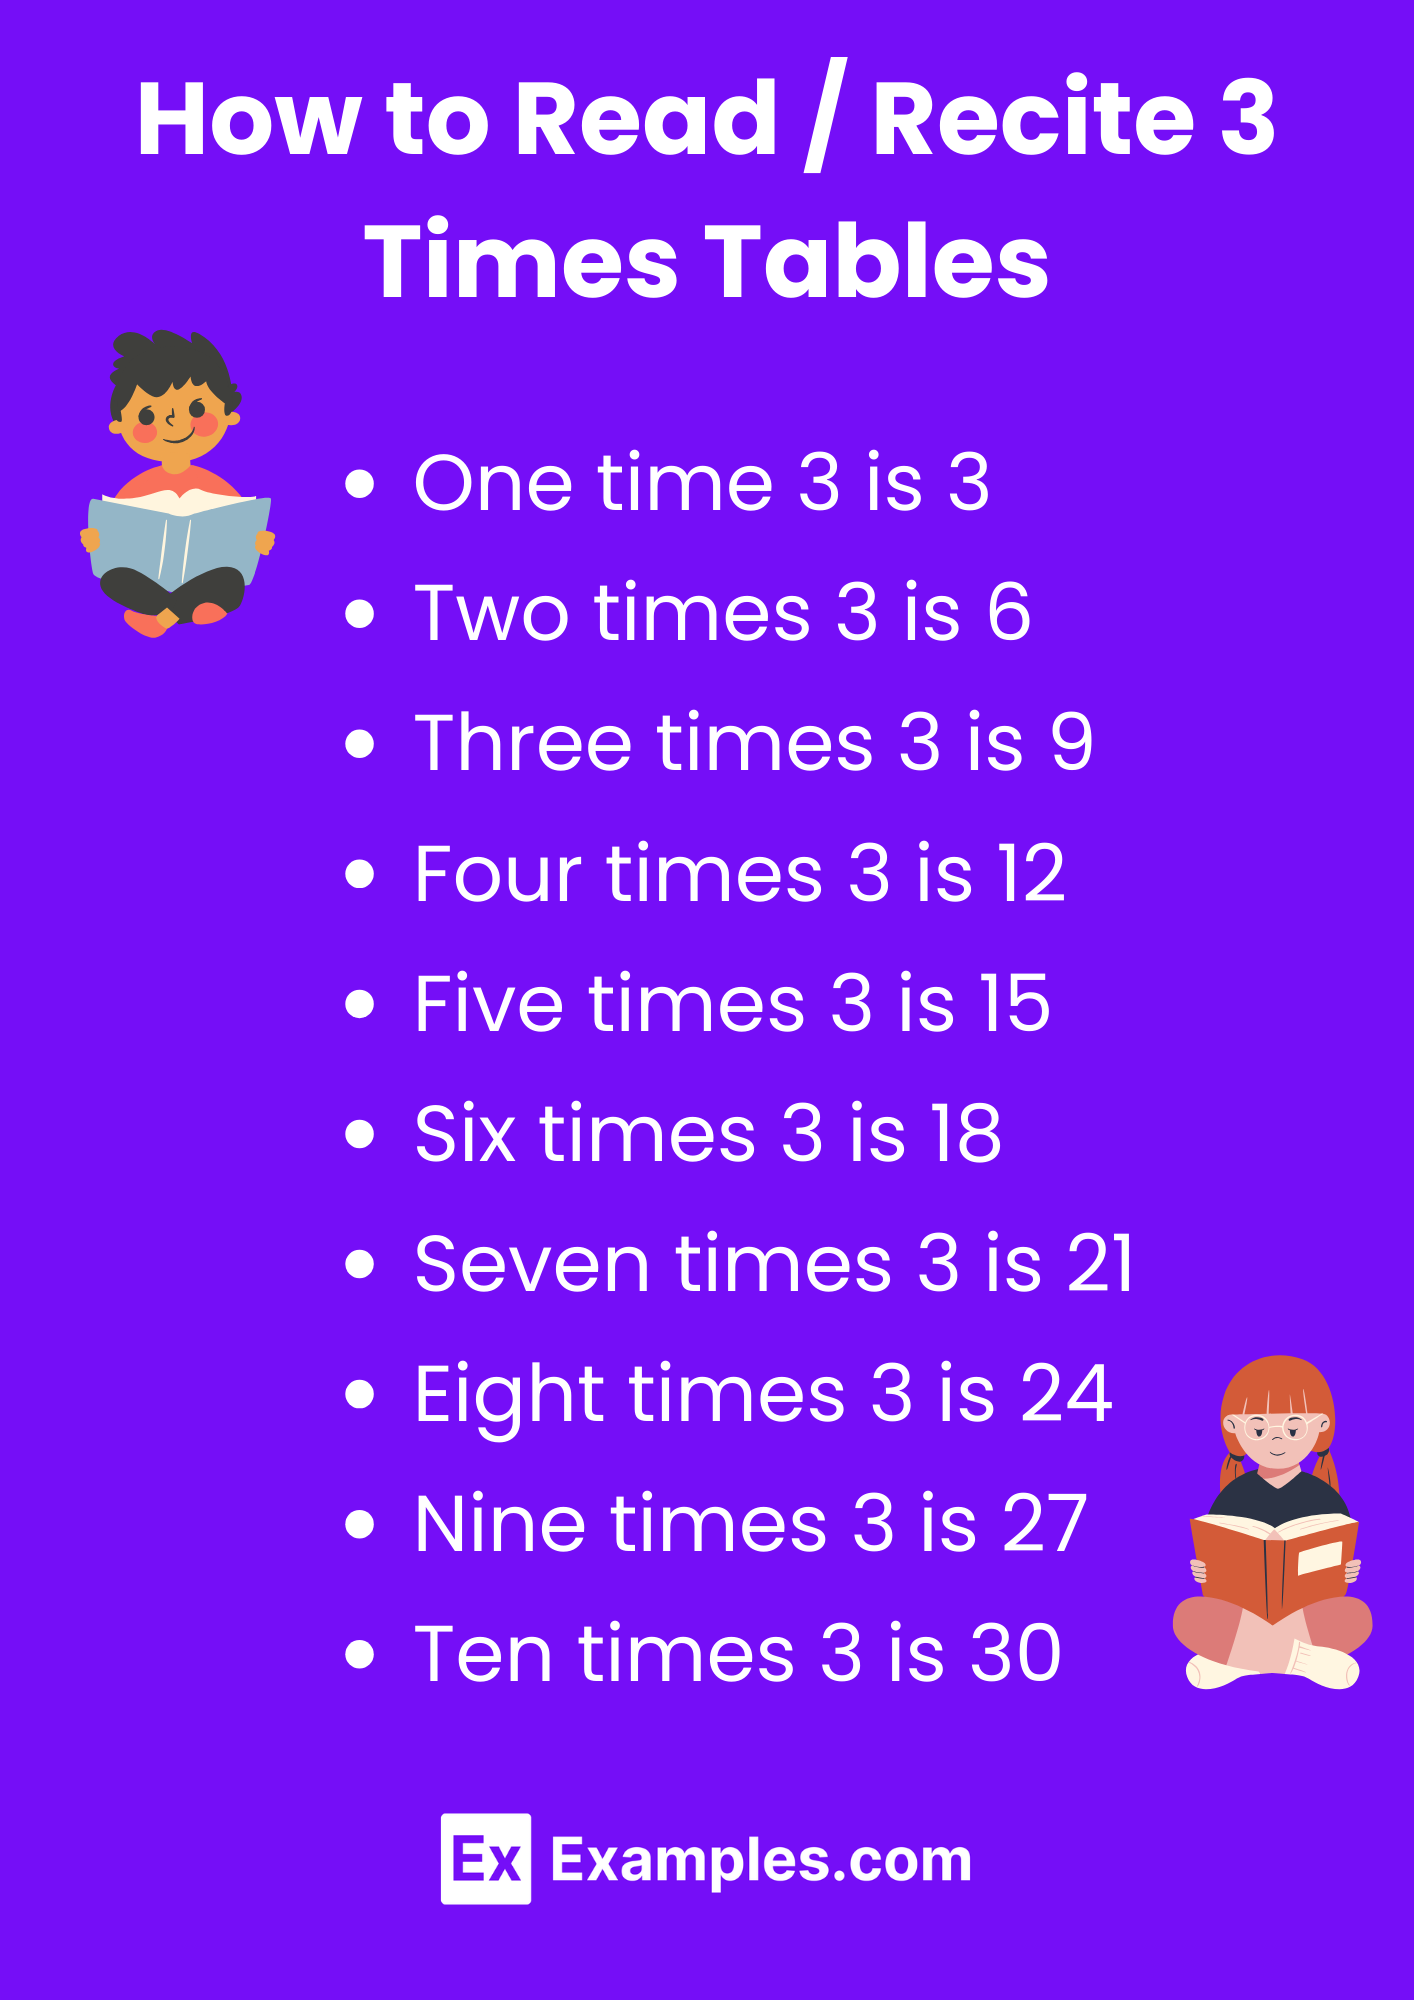 how to read recite 3 times tables